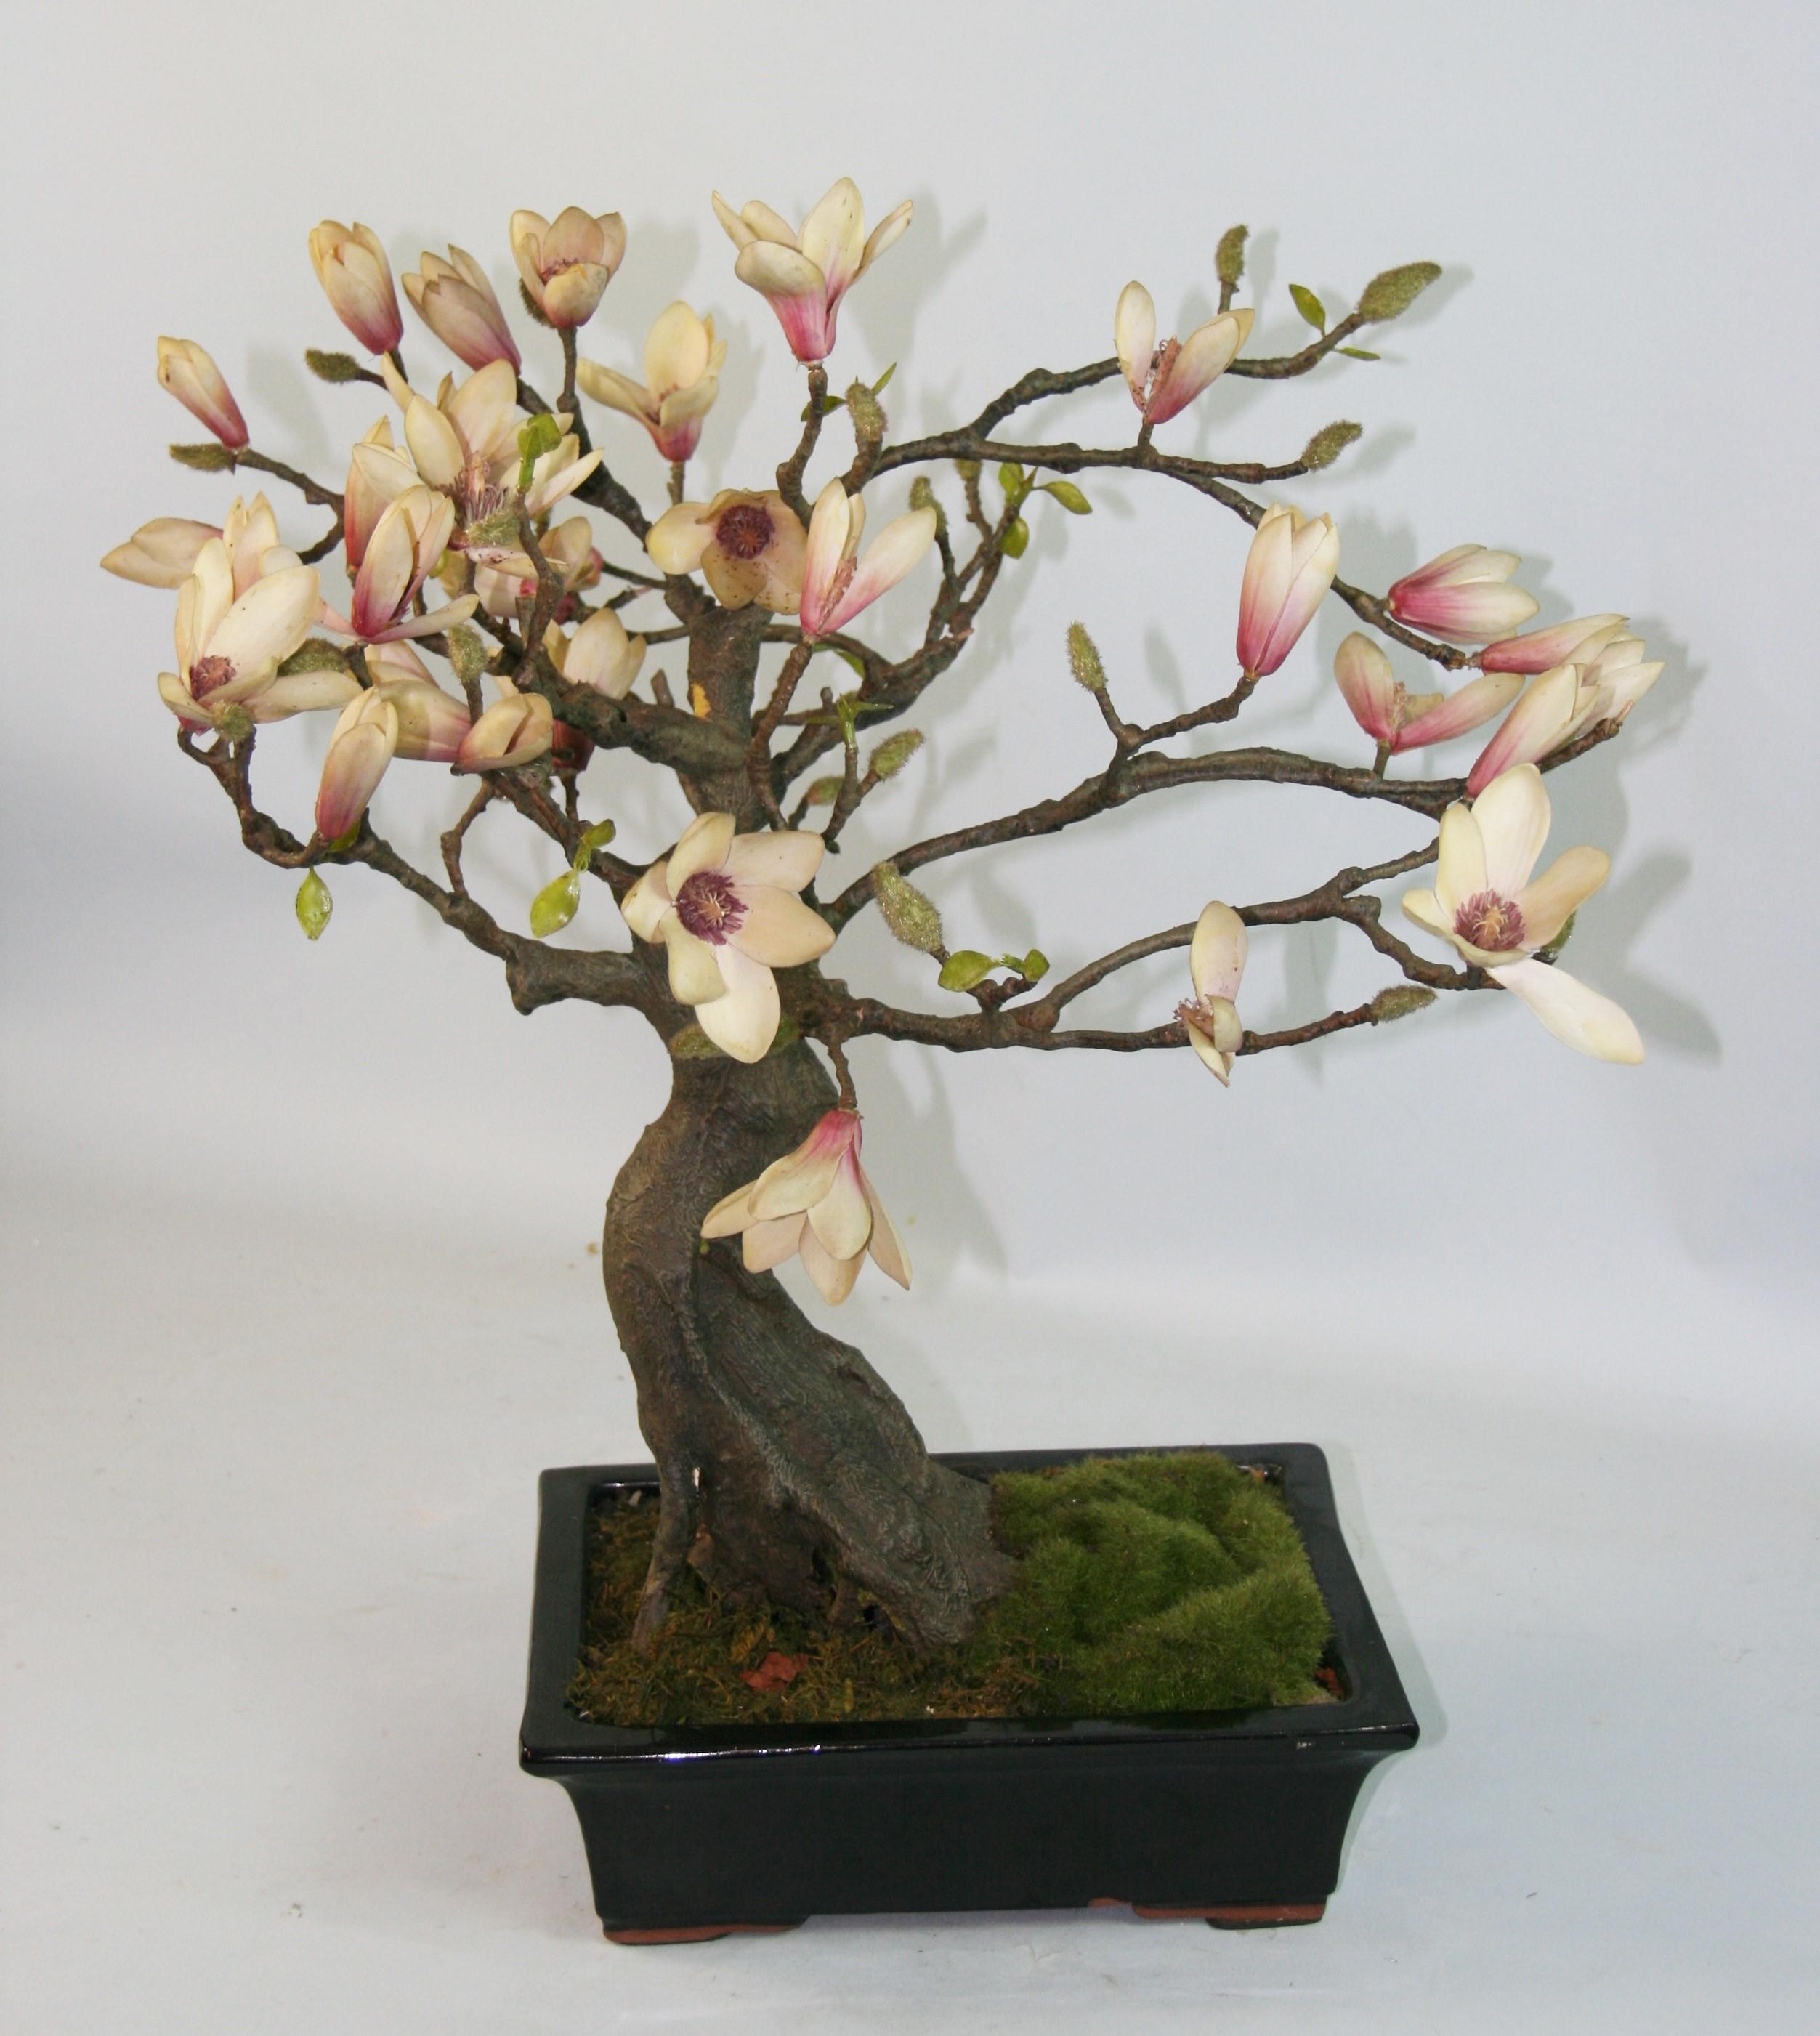 1543 Japanese Bonsai flower arrangement in ceramic container.
Flowers are made of a fabric coated with a rubberized flexible substance.
Moss is covering the ceramic container.
Trunk is covered in the same rubberized substance